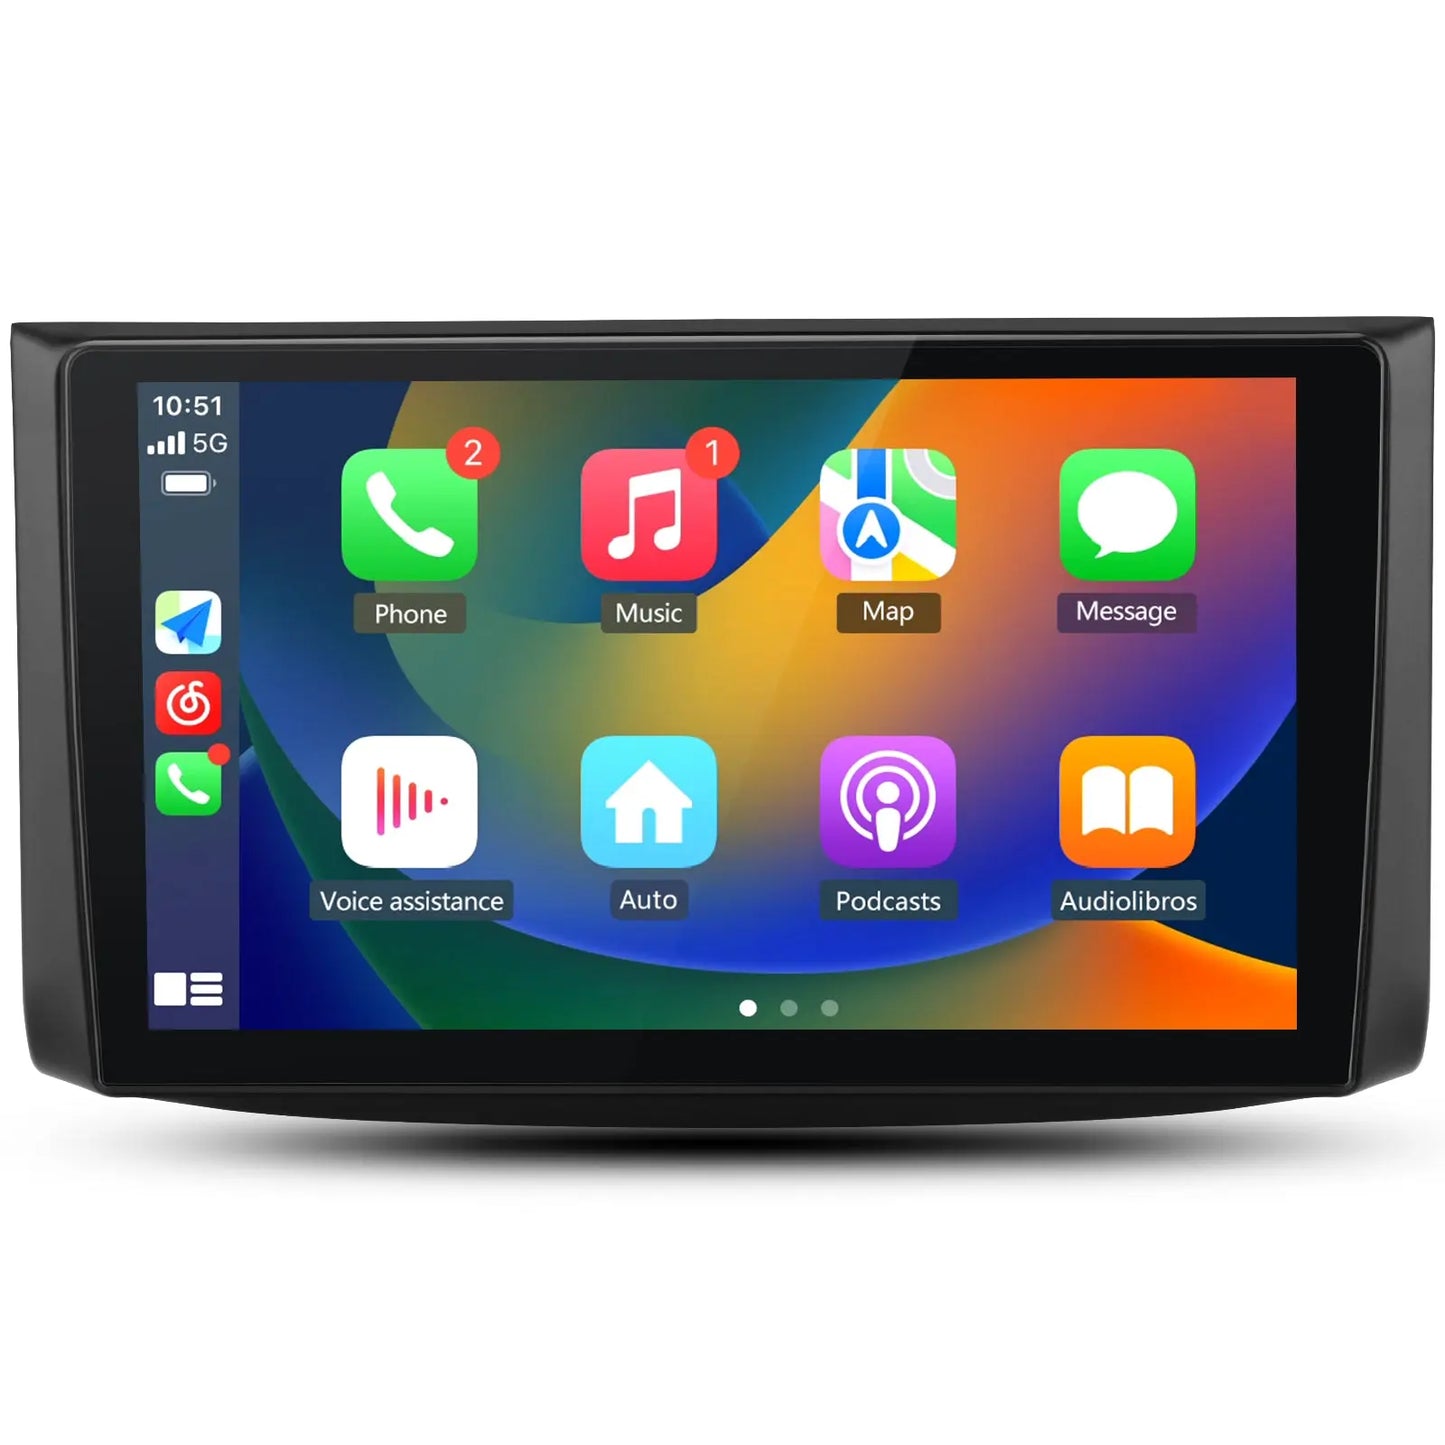 Andriod Car Radio Stereo for Chevrolet Aveo 2006-2012 GPS  Screen Upgrade Built in Carplay/Android Auto SWC BT AM/FM 2G RAM 64G ROM Head Unit AWESAFE